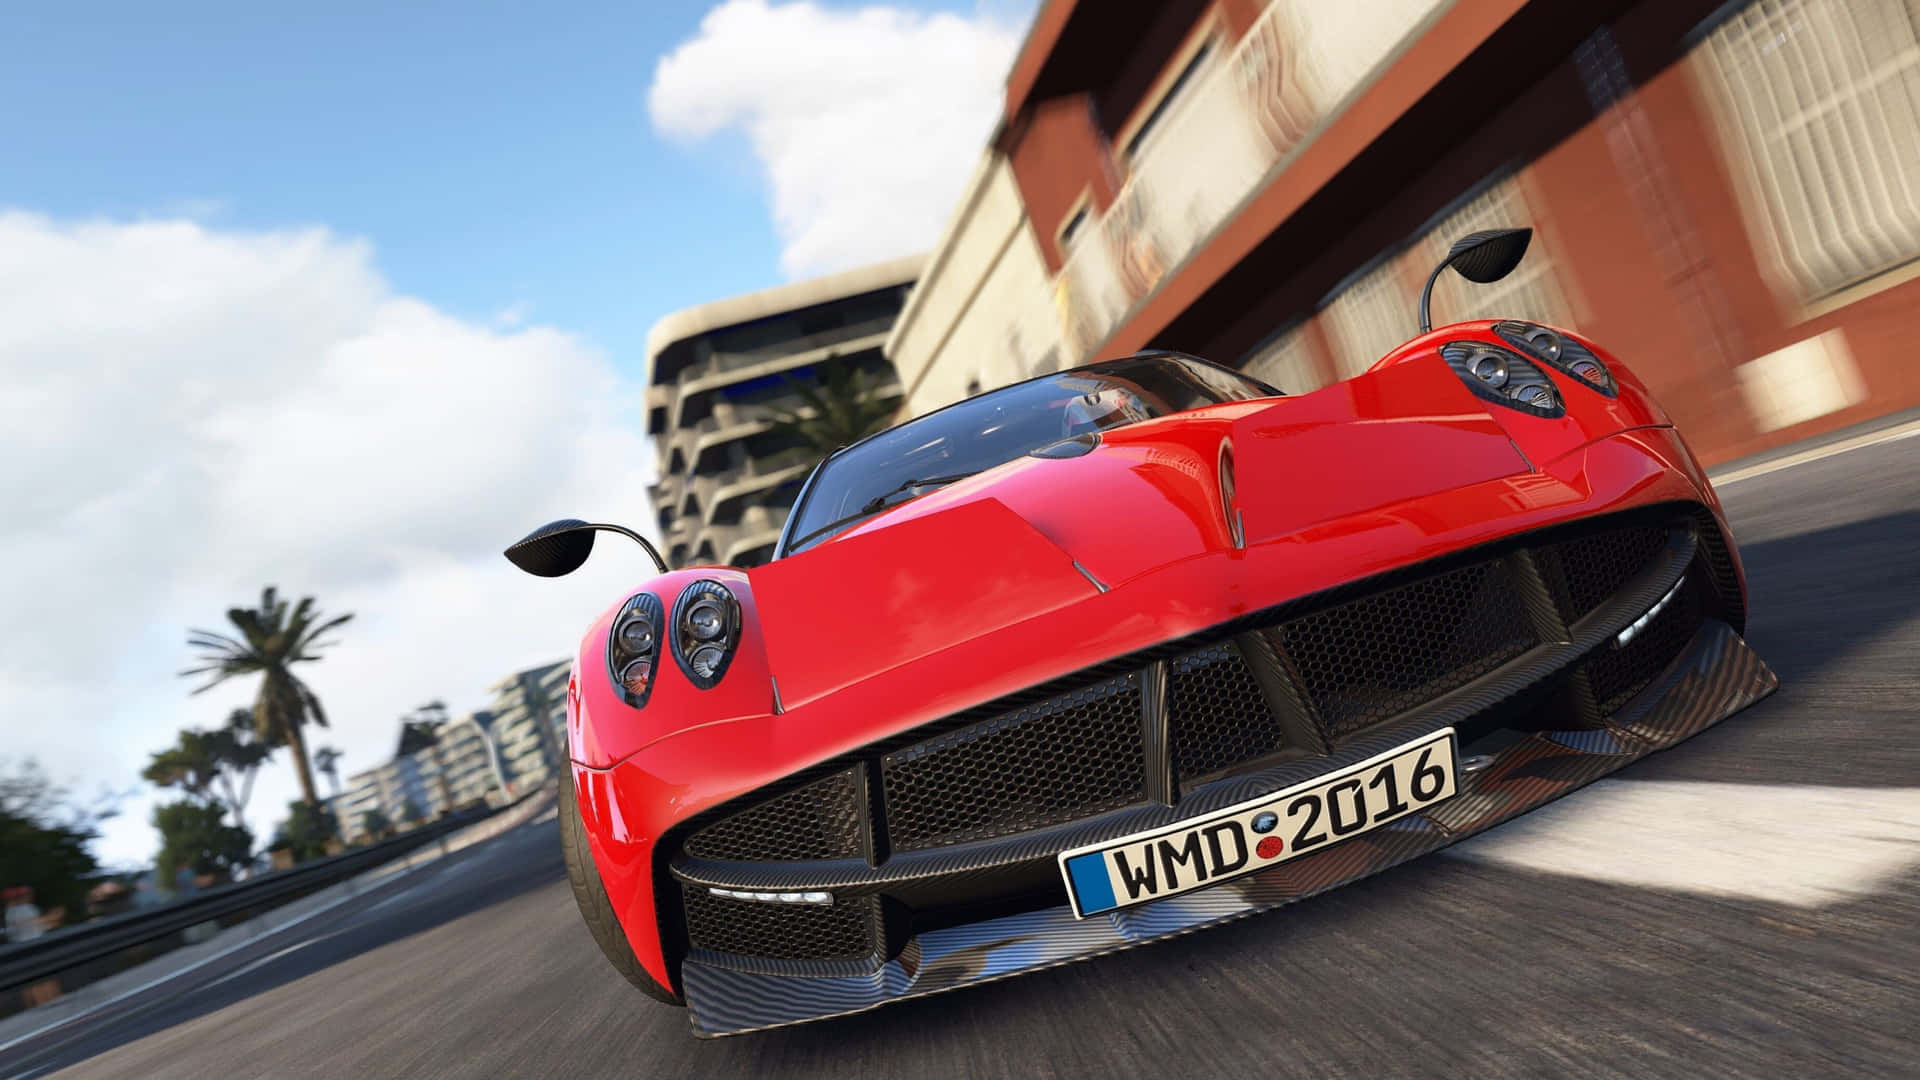 4k Project Cars Red Pagani Huayra '13 Background